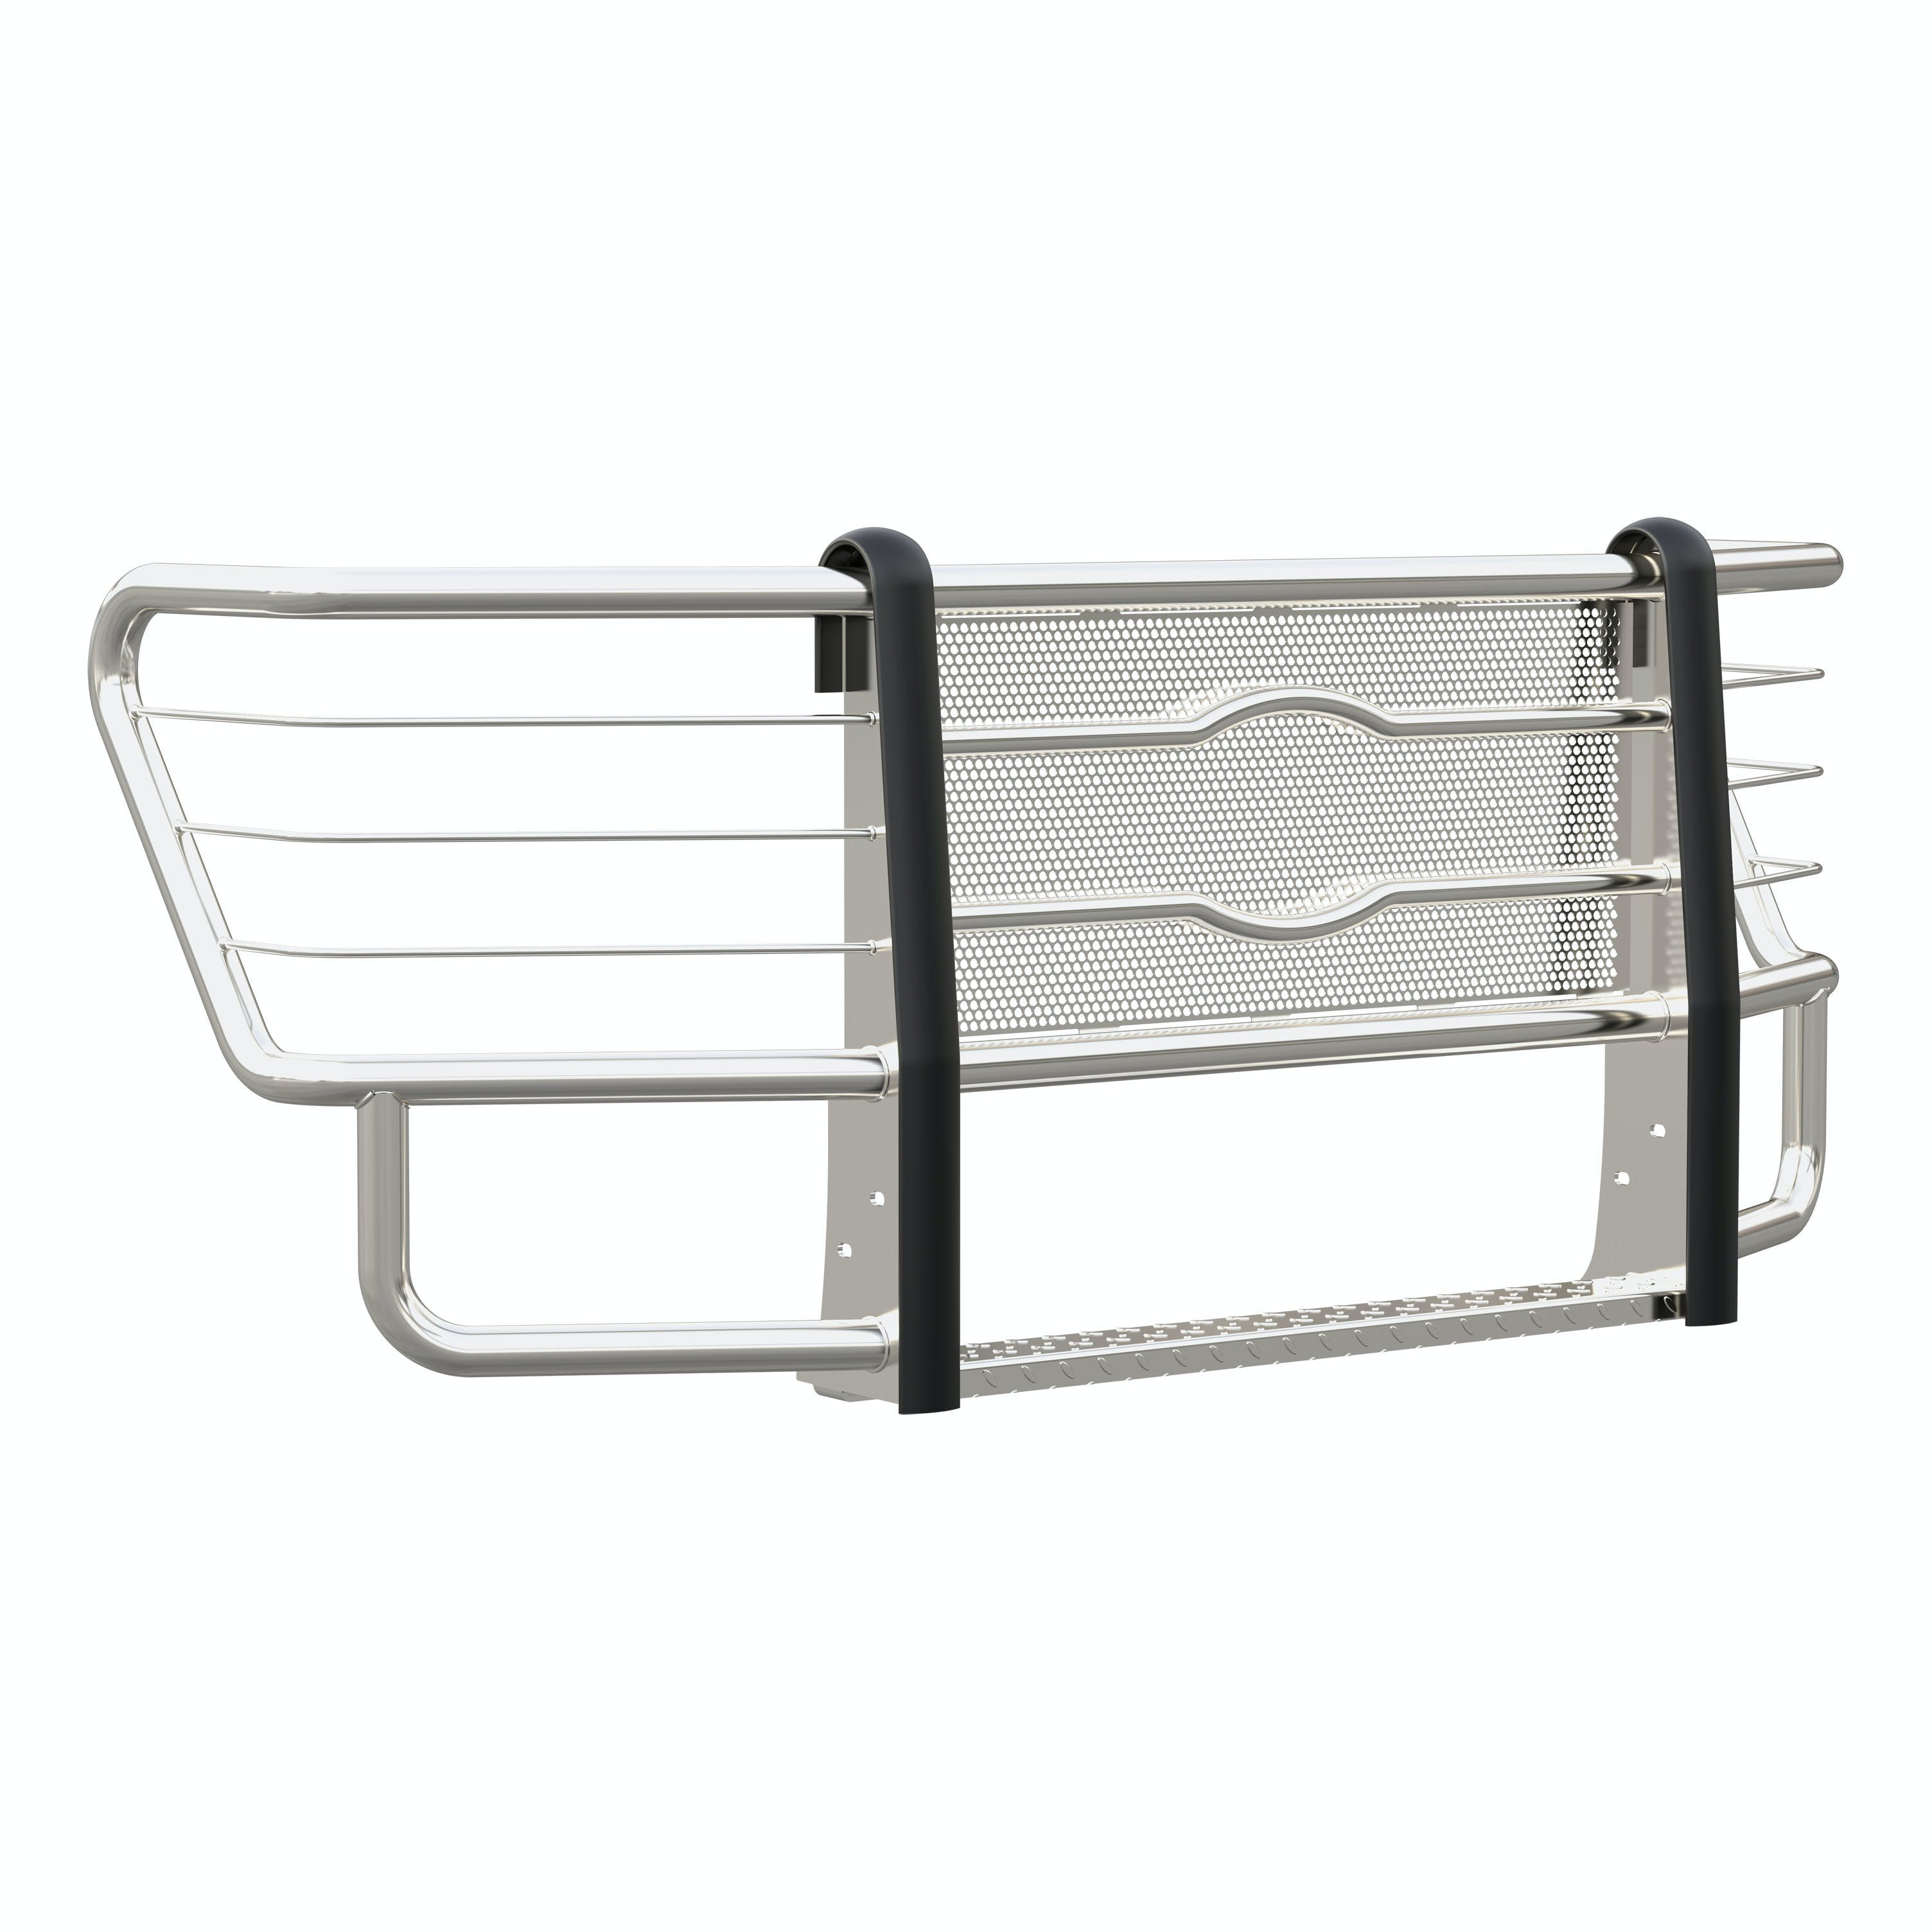 LUVERNE 311723 Prowler Max Grille Guard